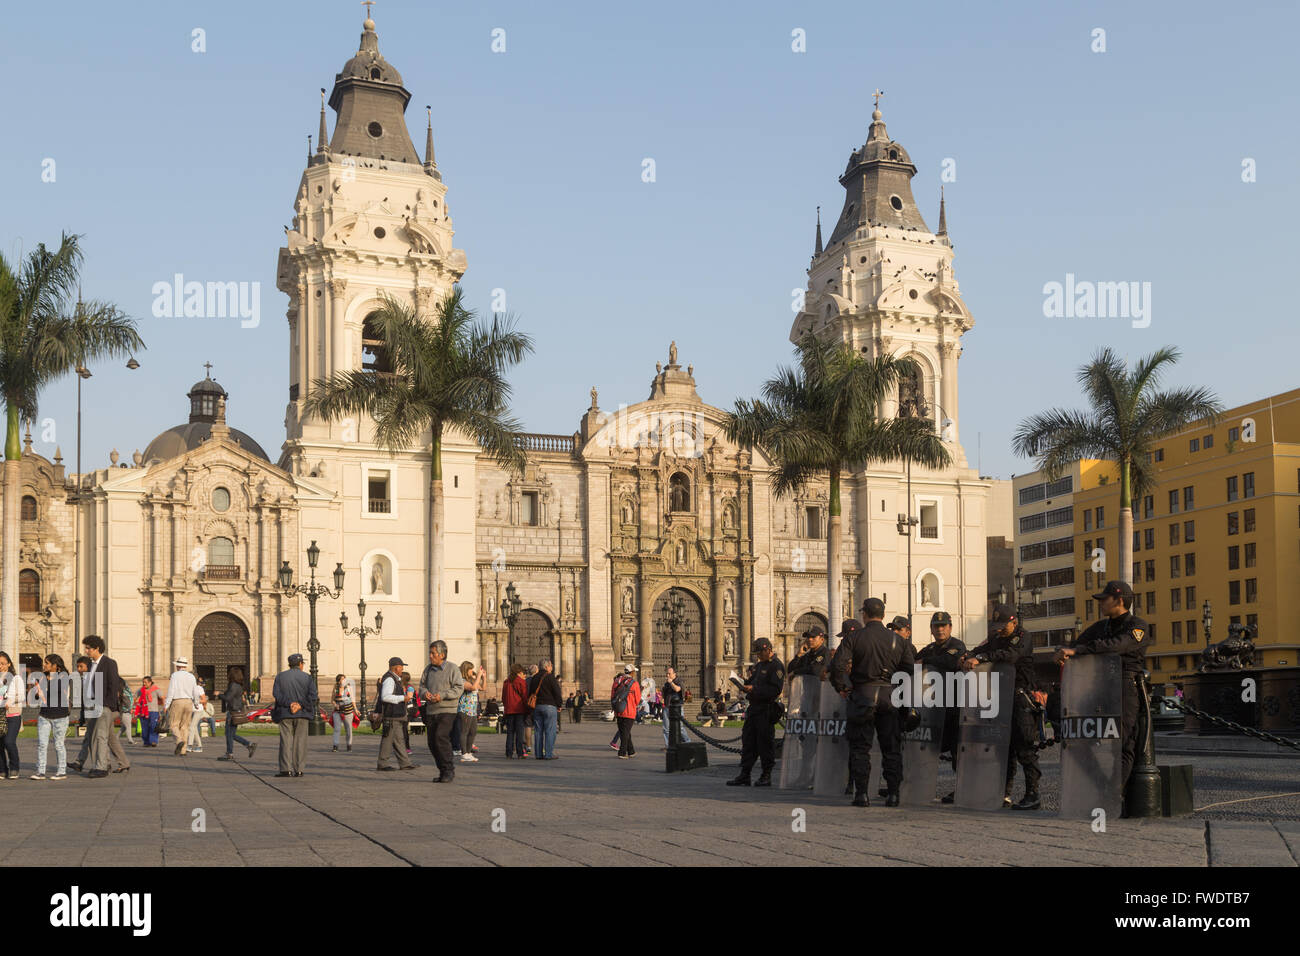 Lima, Peru - September 17, 2015: Policemen are guarding the central square in front of the cathedral. Stock Photo